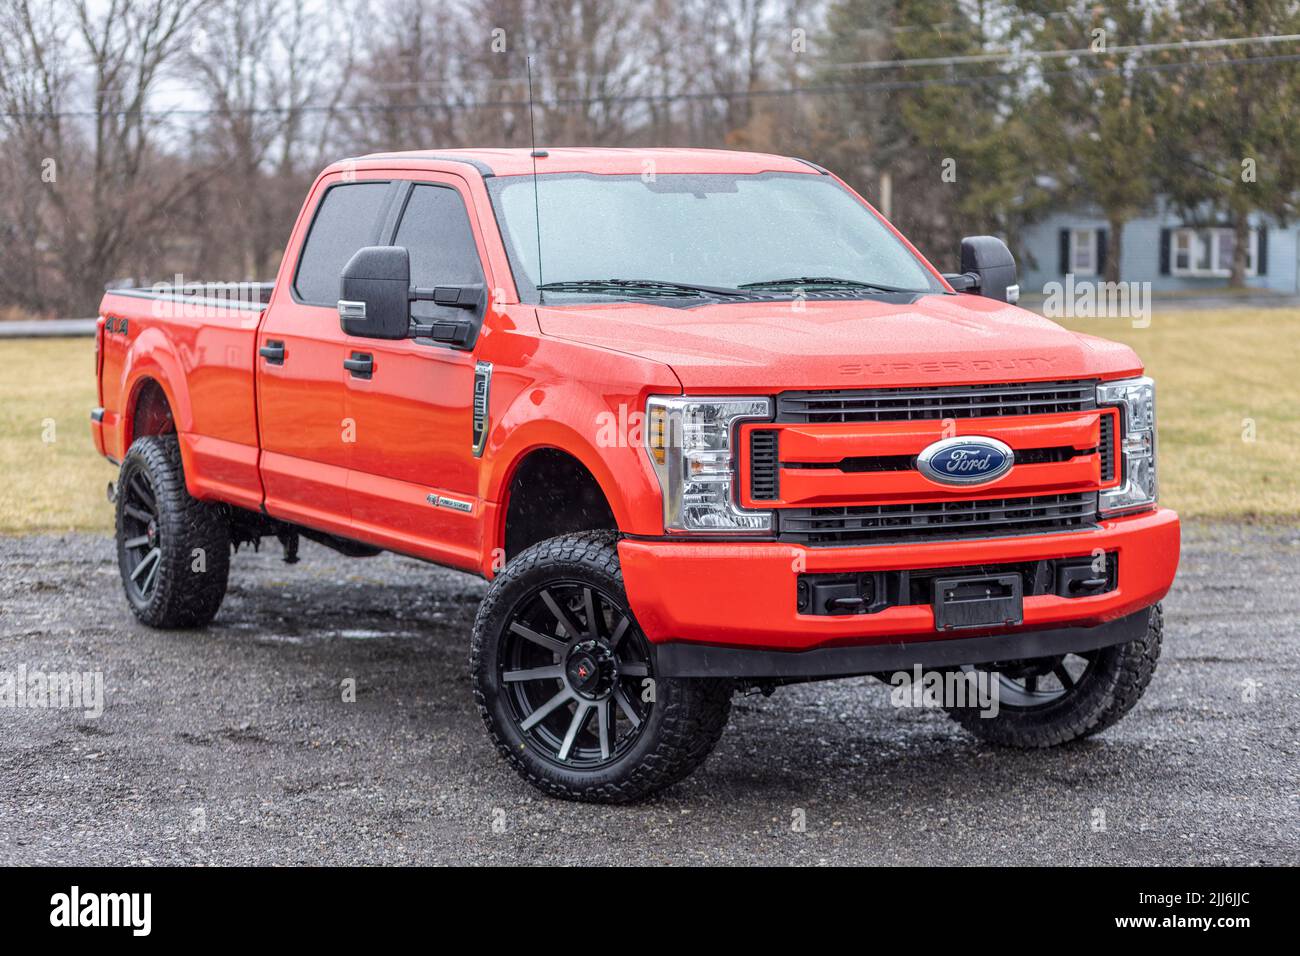 A red lifted Ford truck with aftermarket wheels in Oswego, New York, United States Stock Photo